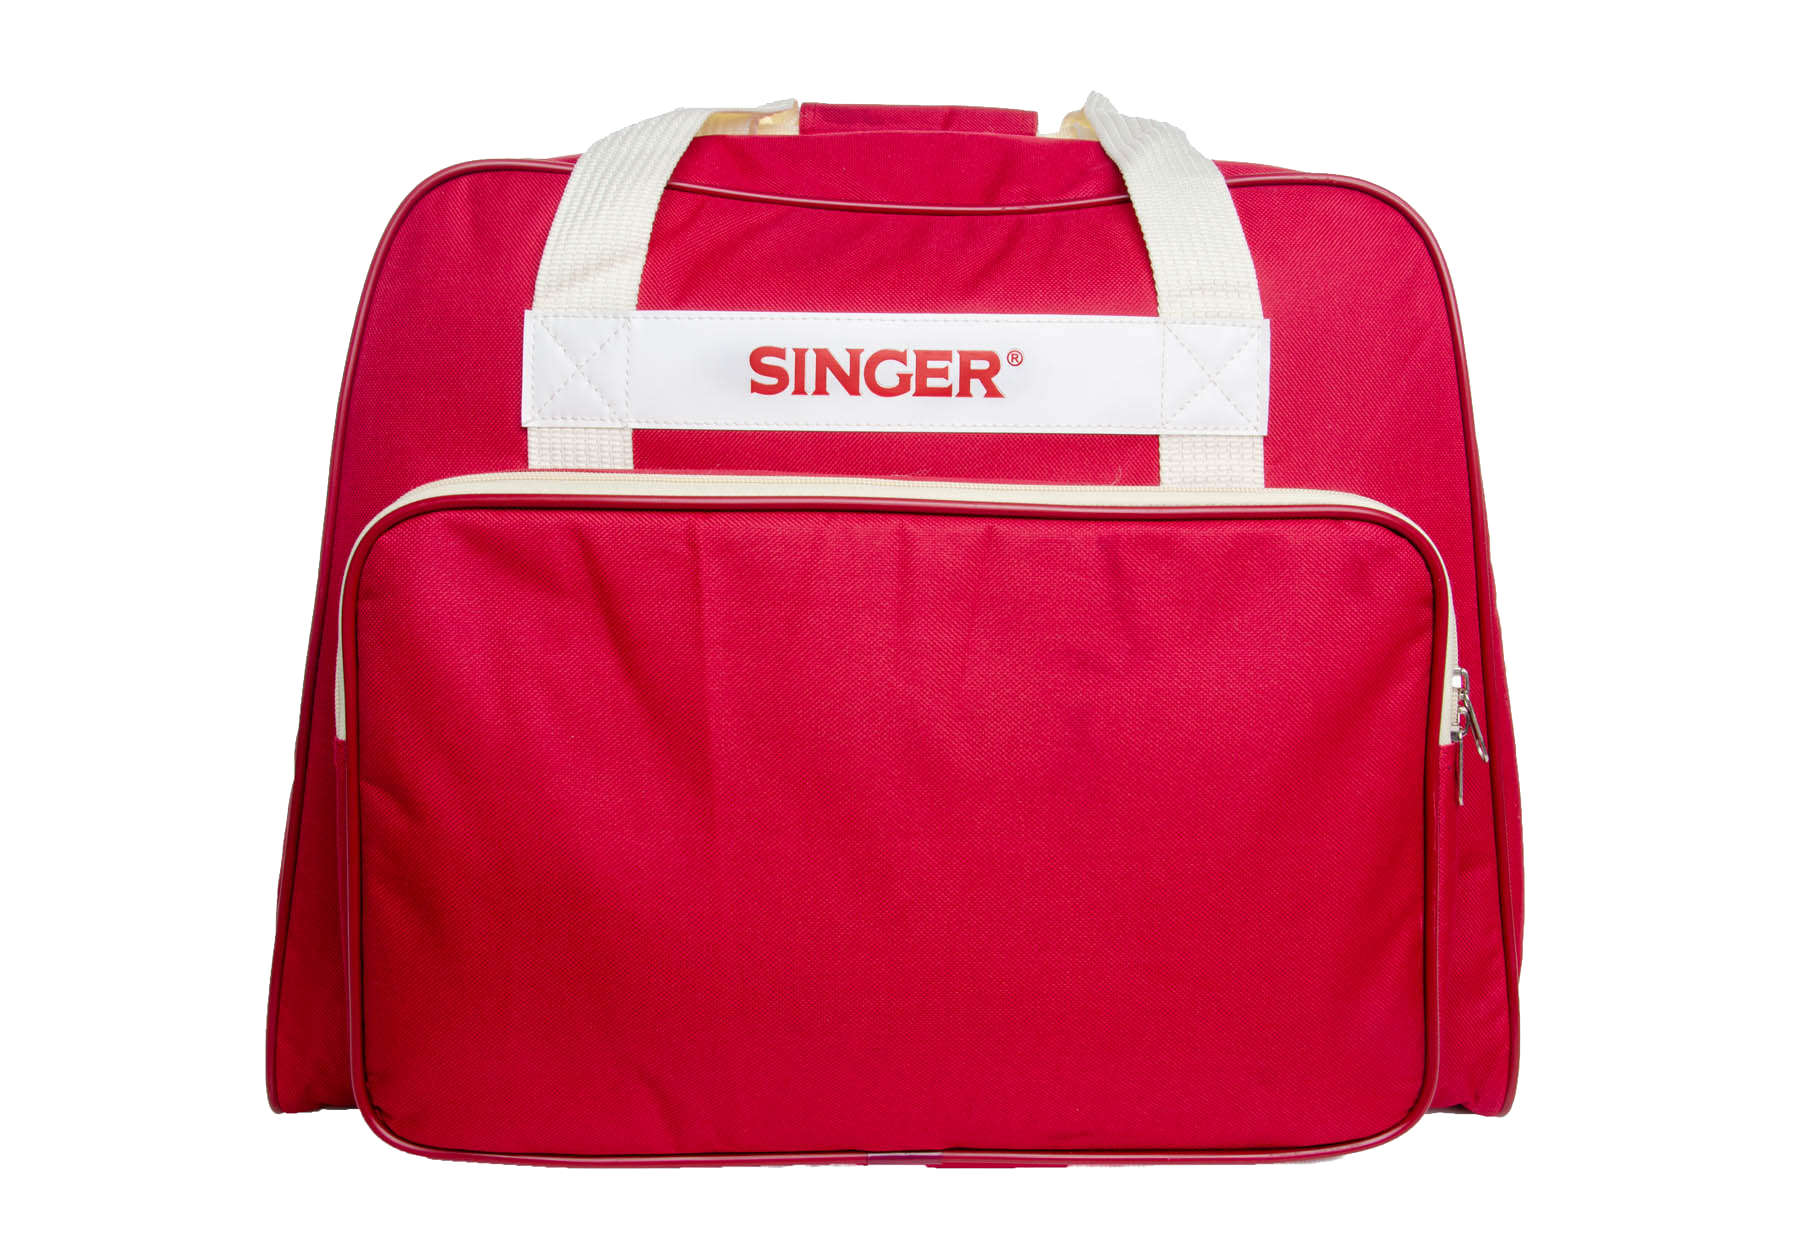 Singer Universal Canvas Sewing Machine Carrying Tote Bag red